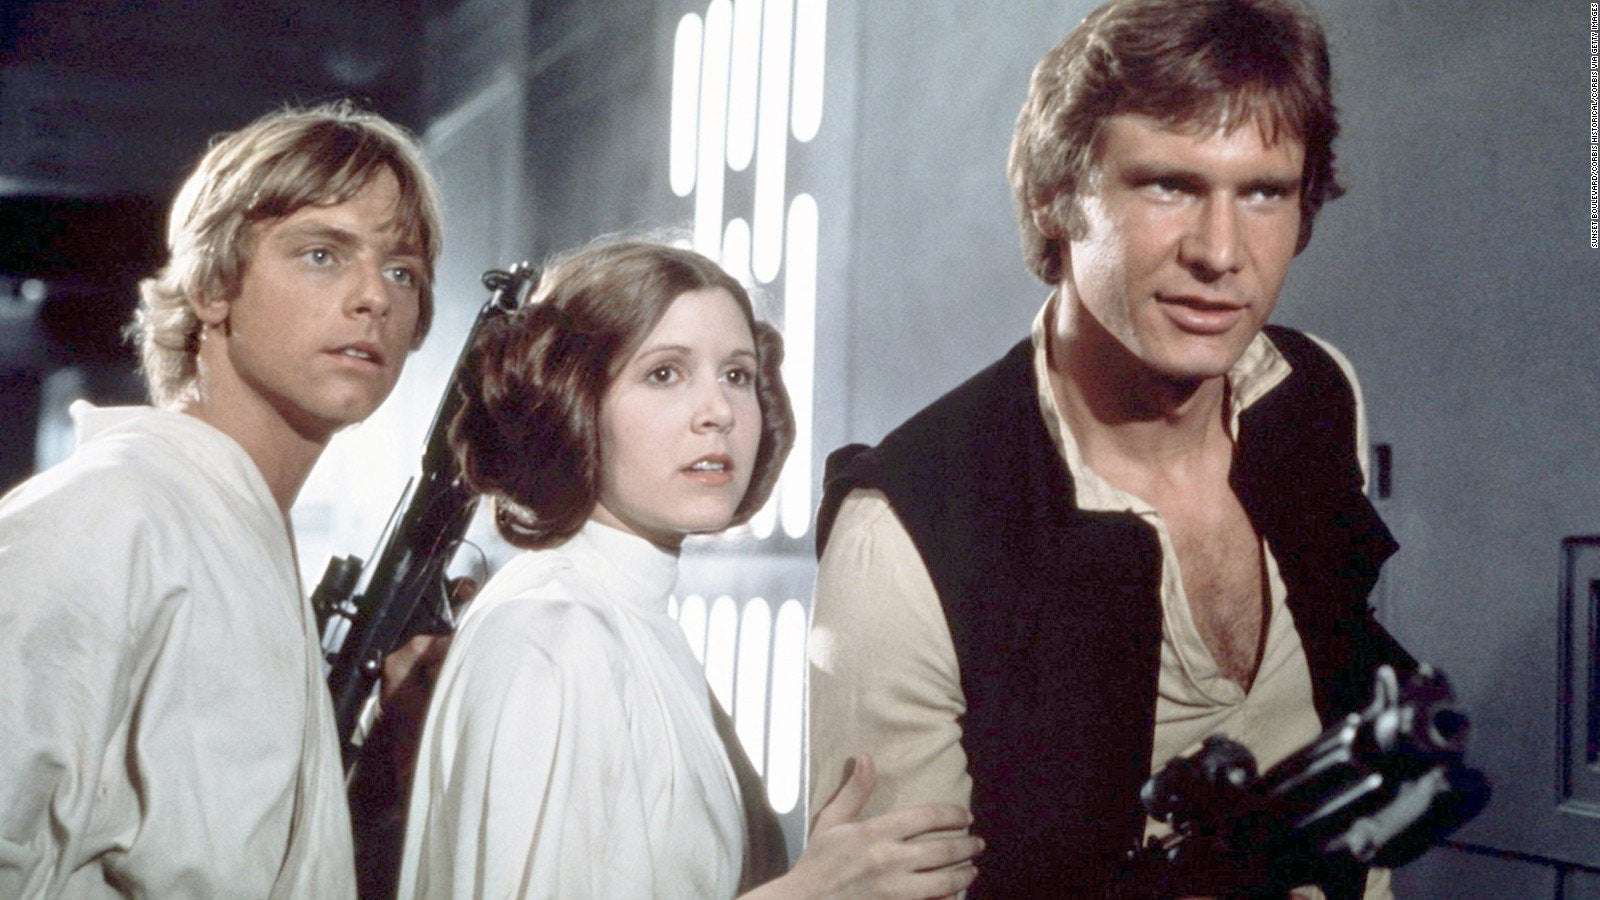 image for This Screenwriter's Behind-the-Scenes Mark Hamill Story Will Brighten Your Day